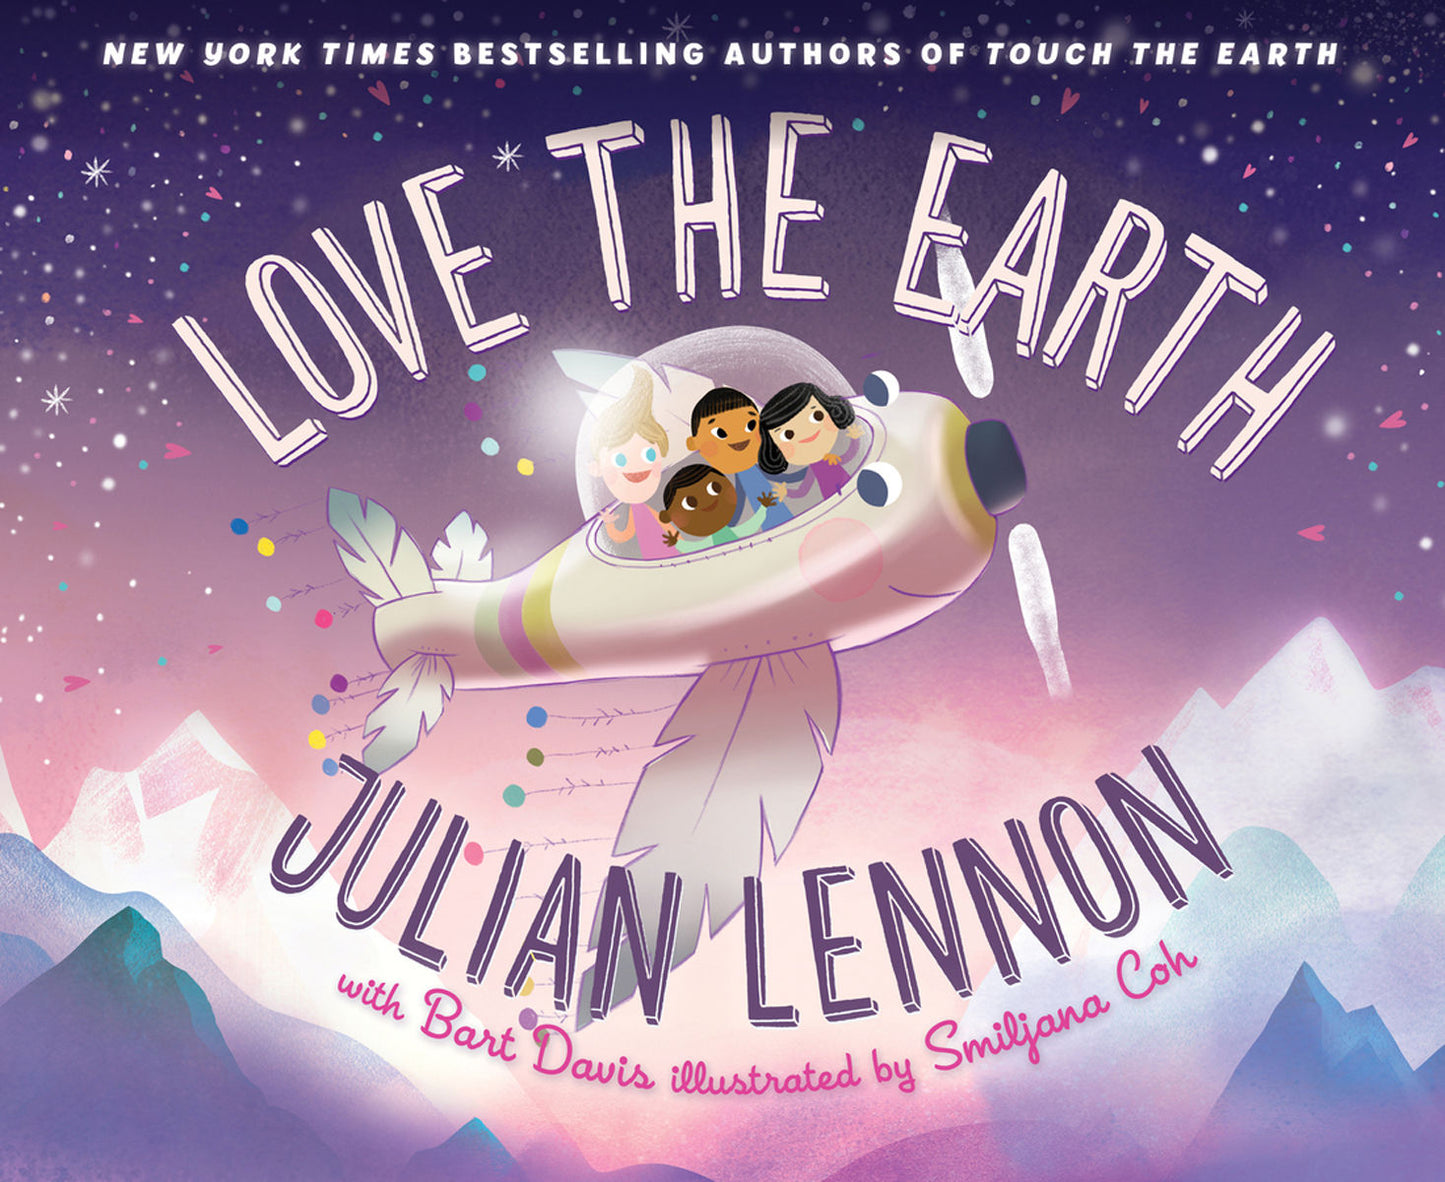 Love The Earth Book - with Free Audio/Video Book